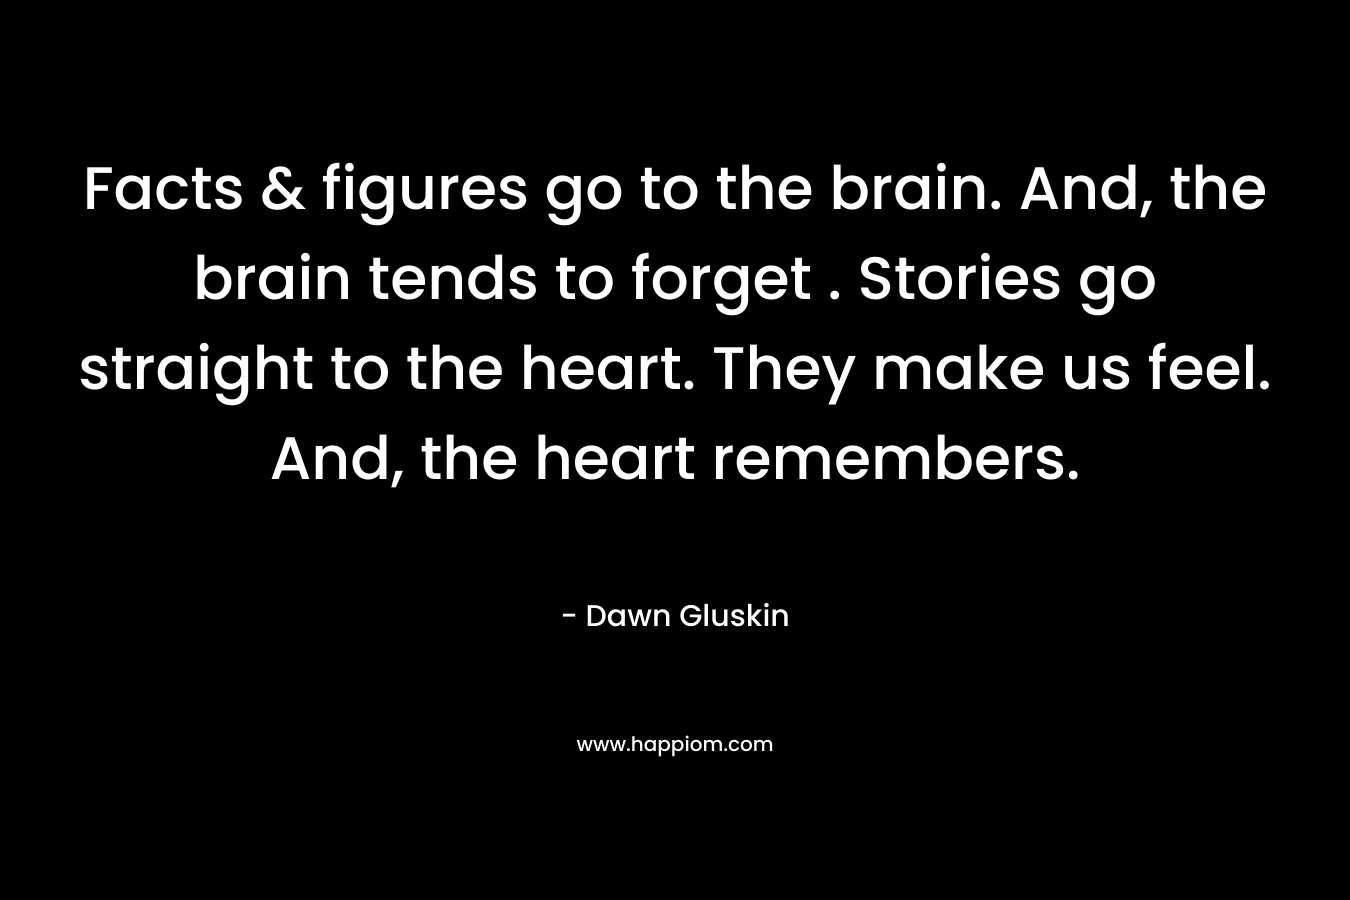 Facts & figures go to the brain. And, the brain tends to forget . Stories go straight to the heart. They make us feel. And, the heart remembers. – Dawn Gluskin